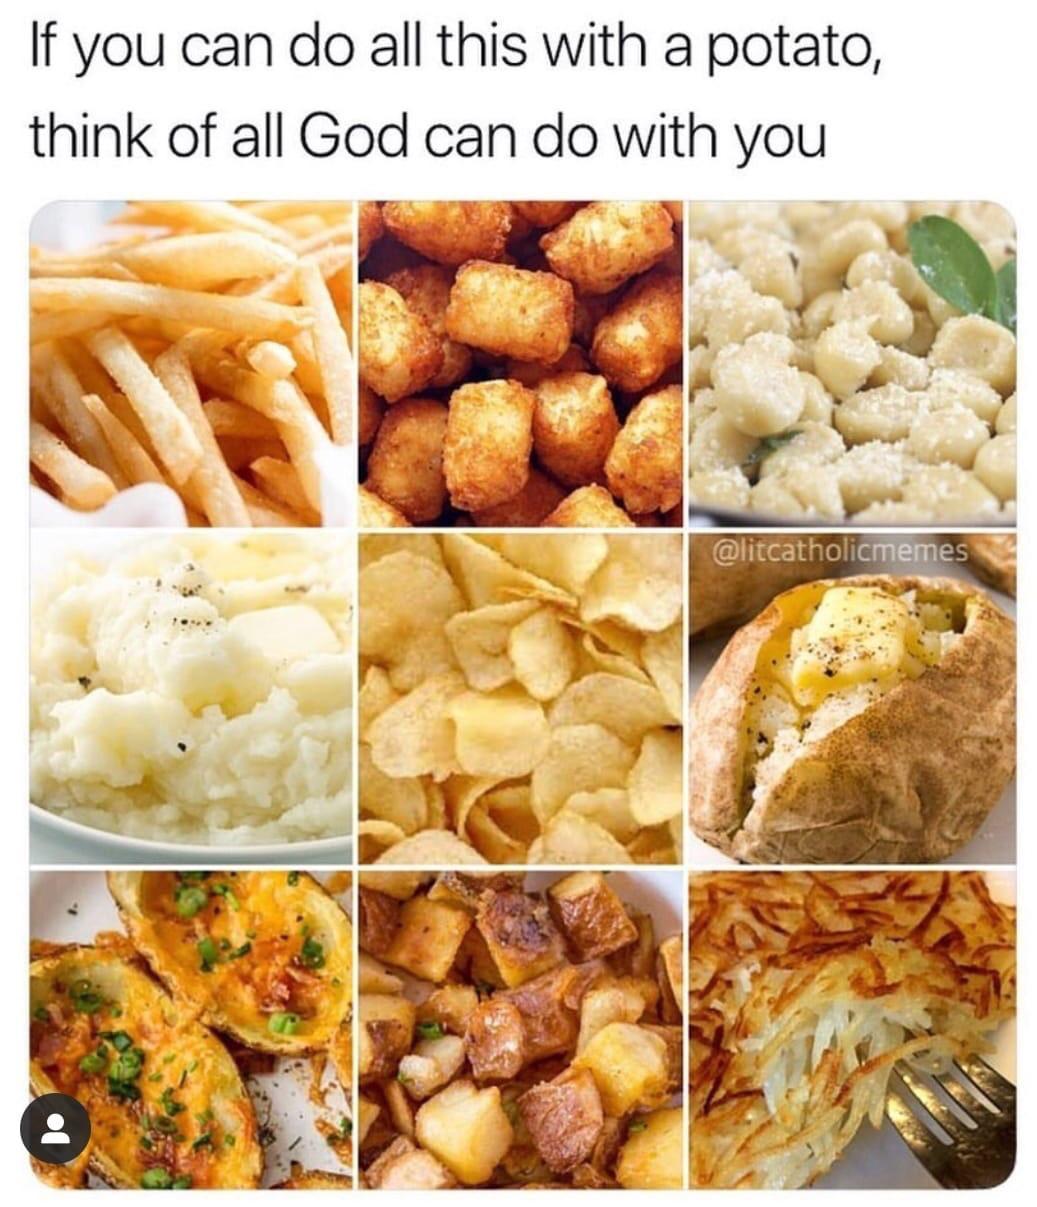 political political-memes political text: If you can do all this with a potato, think of all God can do with you @litcathohcmemez 